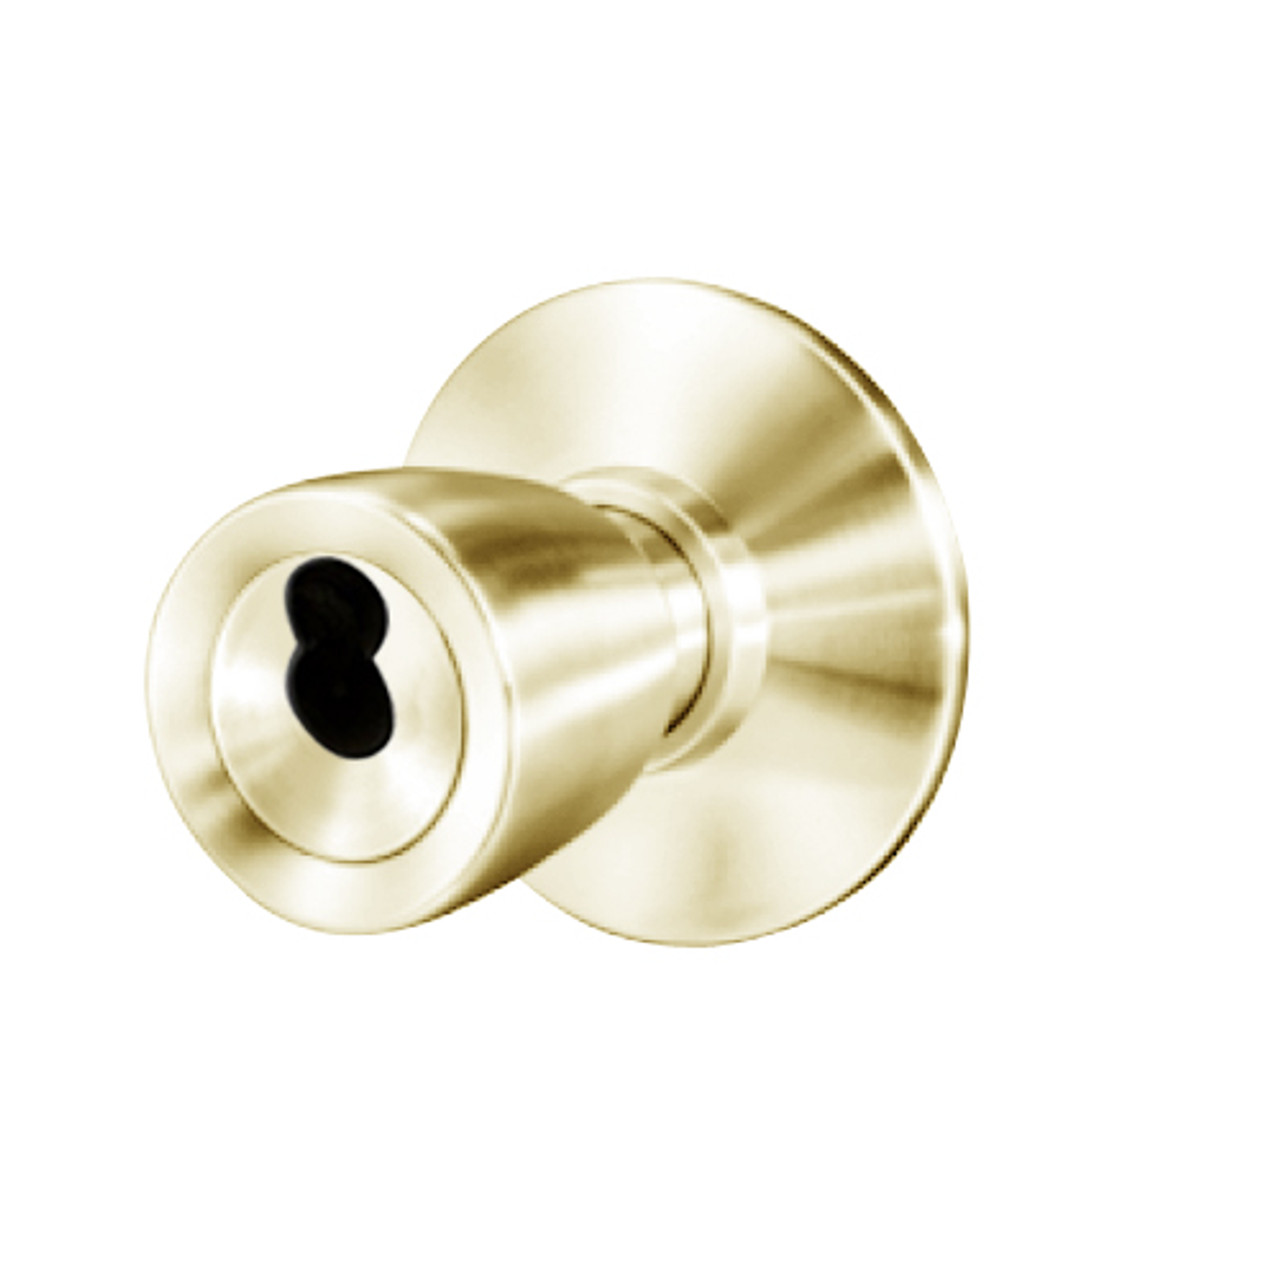 8K37AB6DS3606 Best 8K Series Entrance Heavy Duty Cylindrical Knob Locks with Tulip Style in Satin Brass